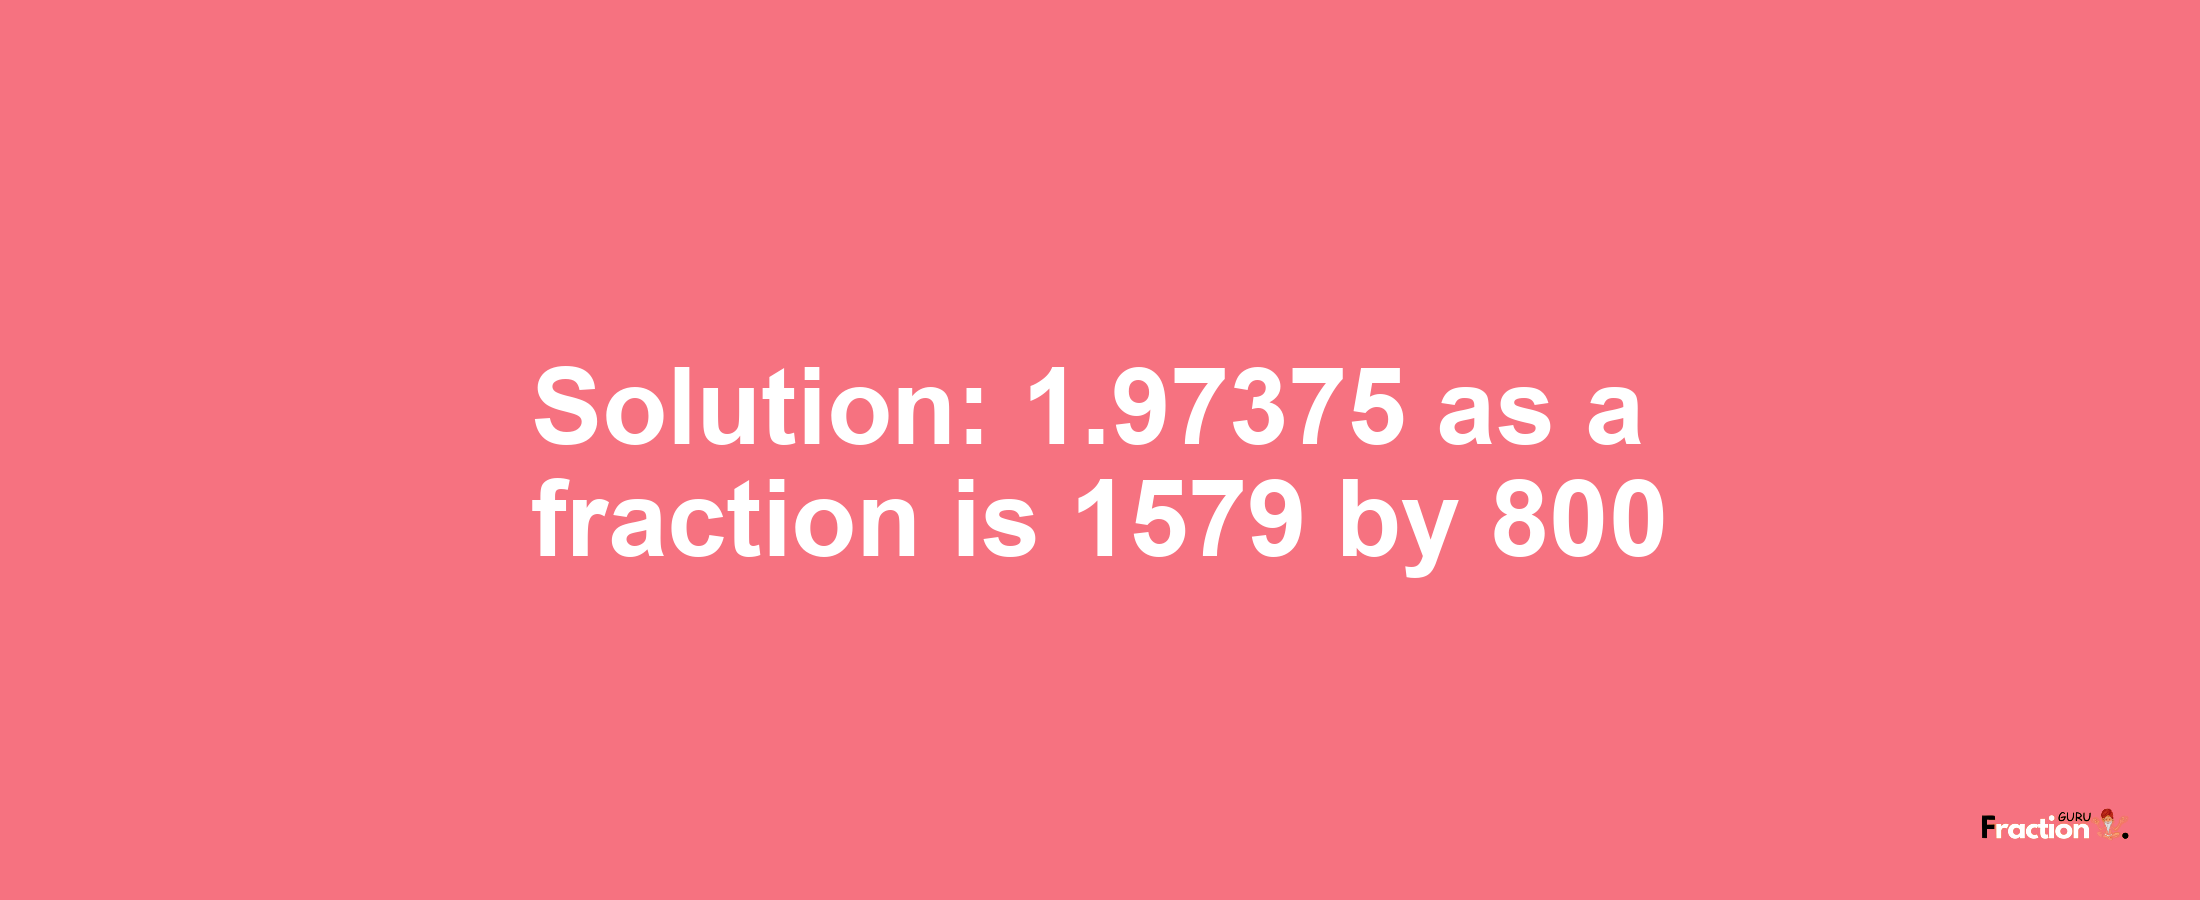 Solution:1.97375 as a fraction is 1579/800